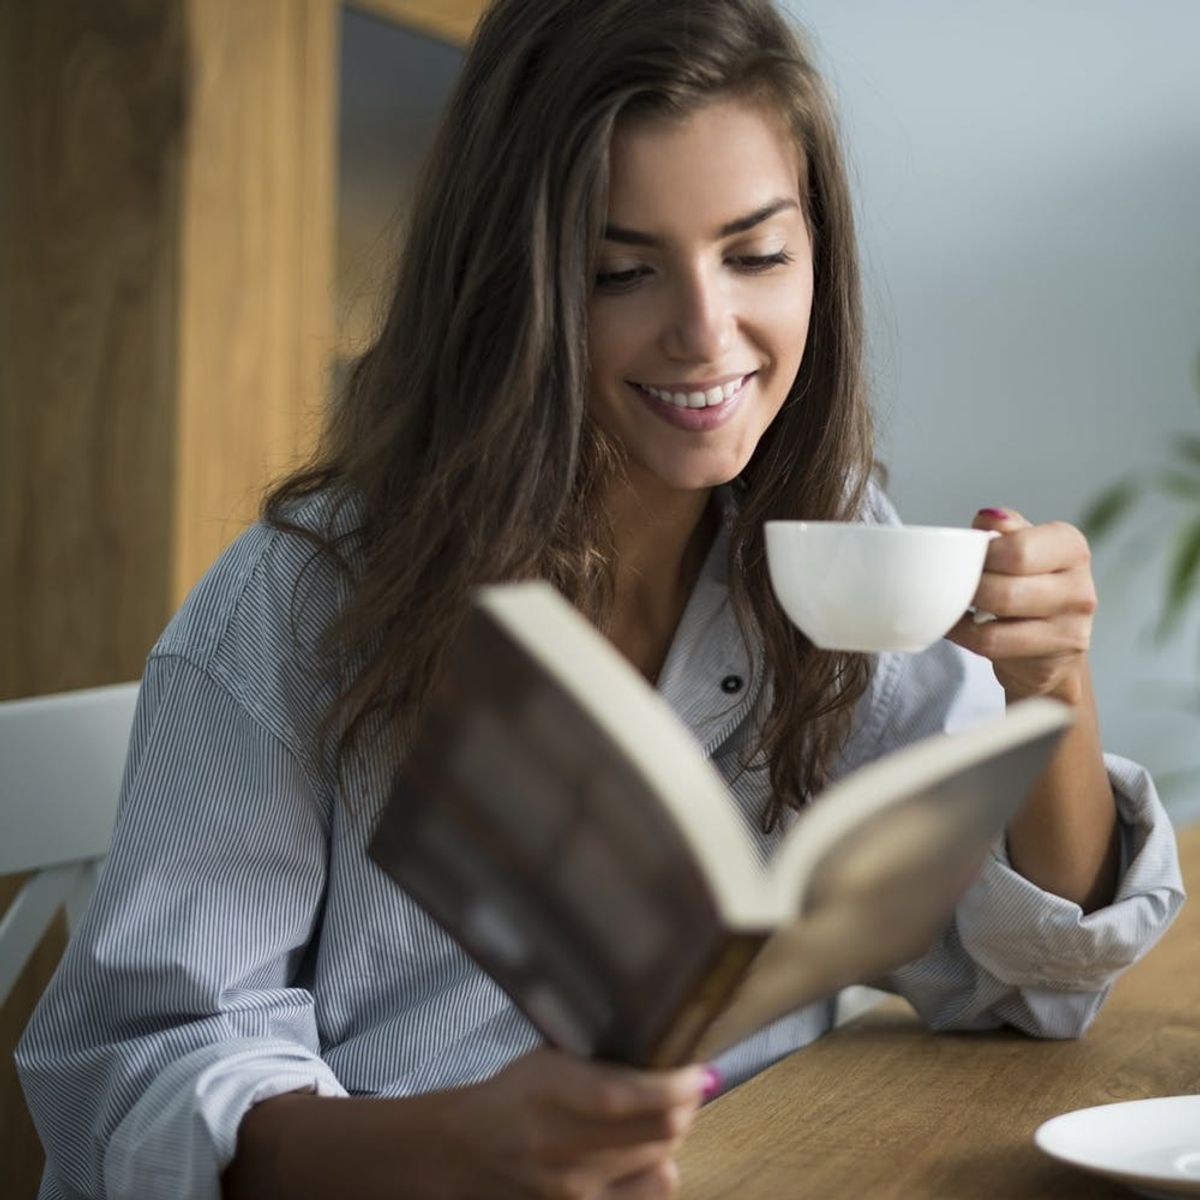 8 Smart Books to Read Before Starting Your Own Business